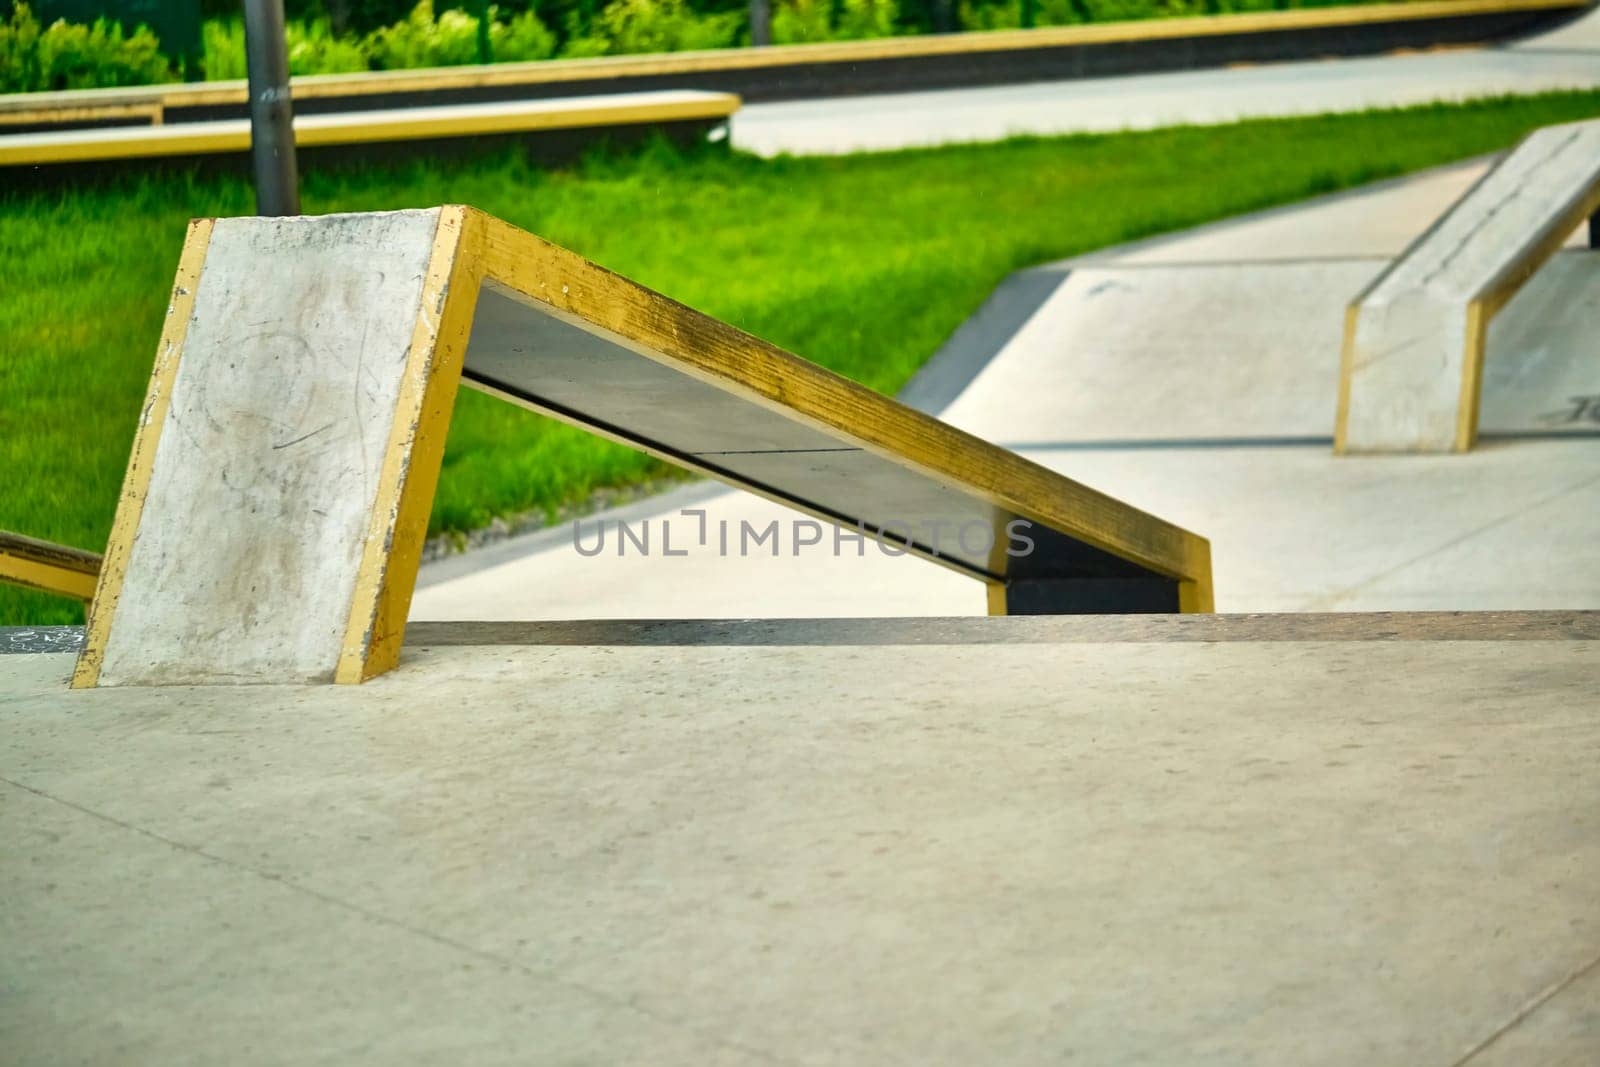 Jumps and Ramps in a Skateboard Park. general plan by lempro